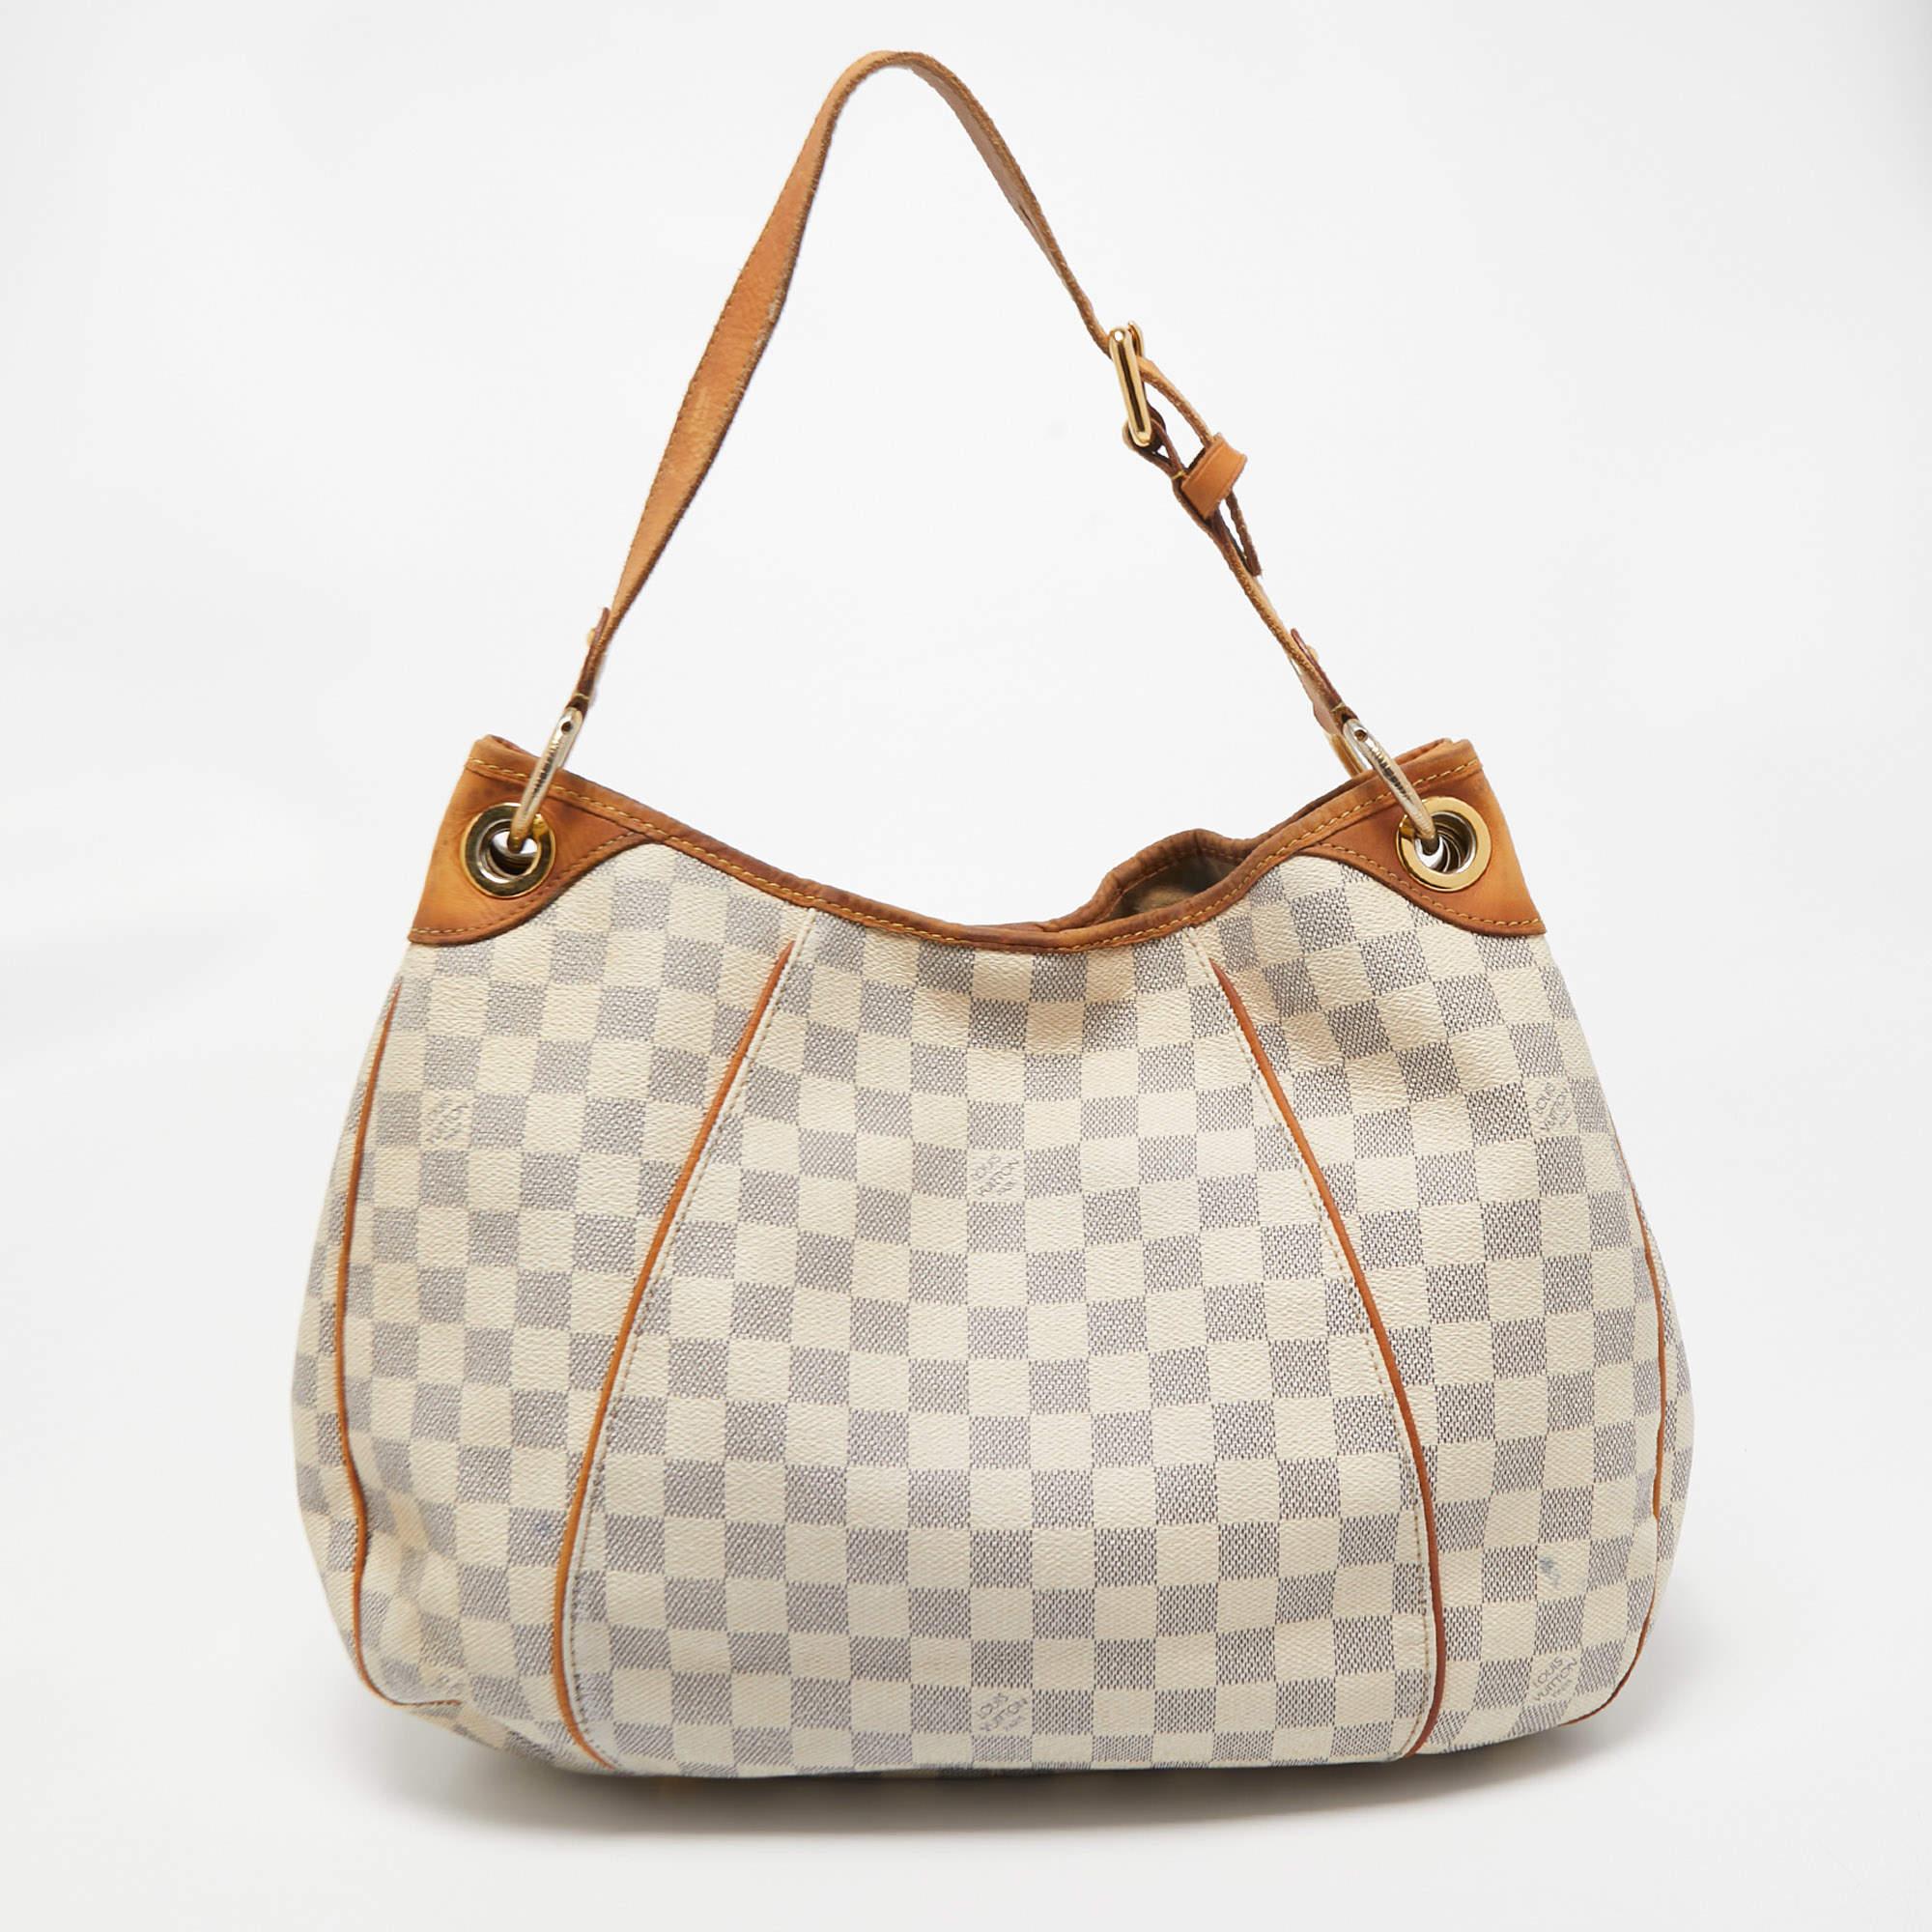 This Louis Vuitton bag for women is super classy and functional, perfect for everyday use. We like the simple details and its high-quality finish.

